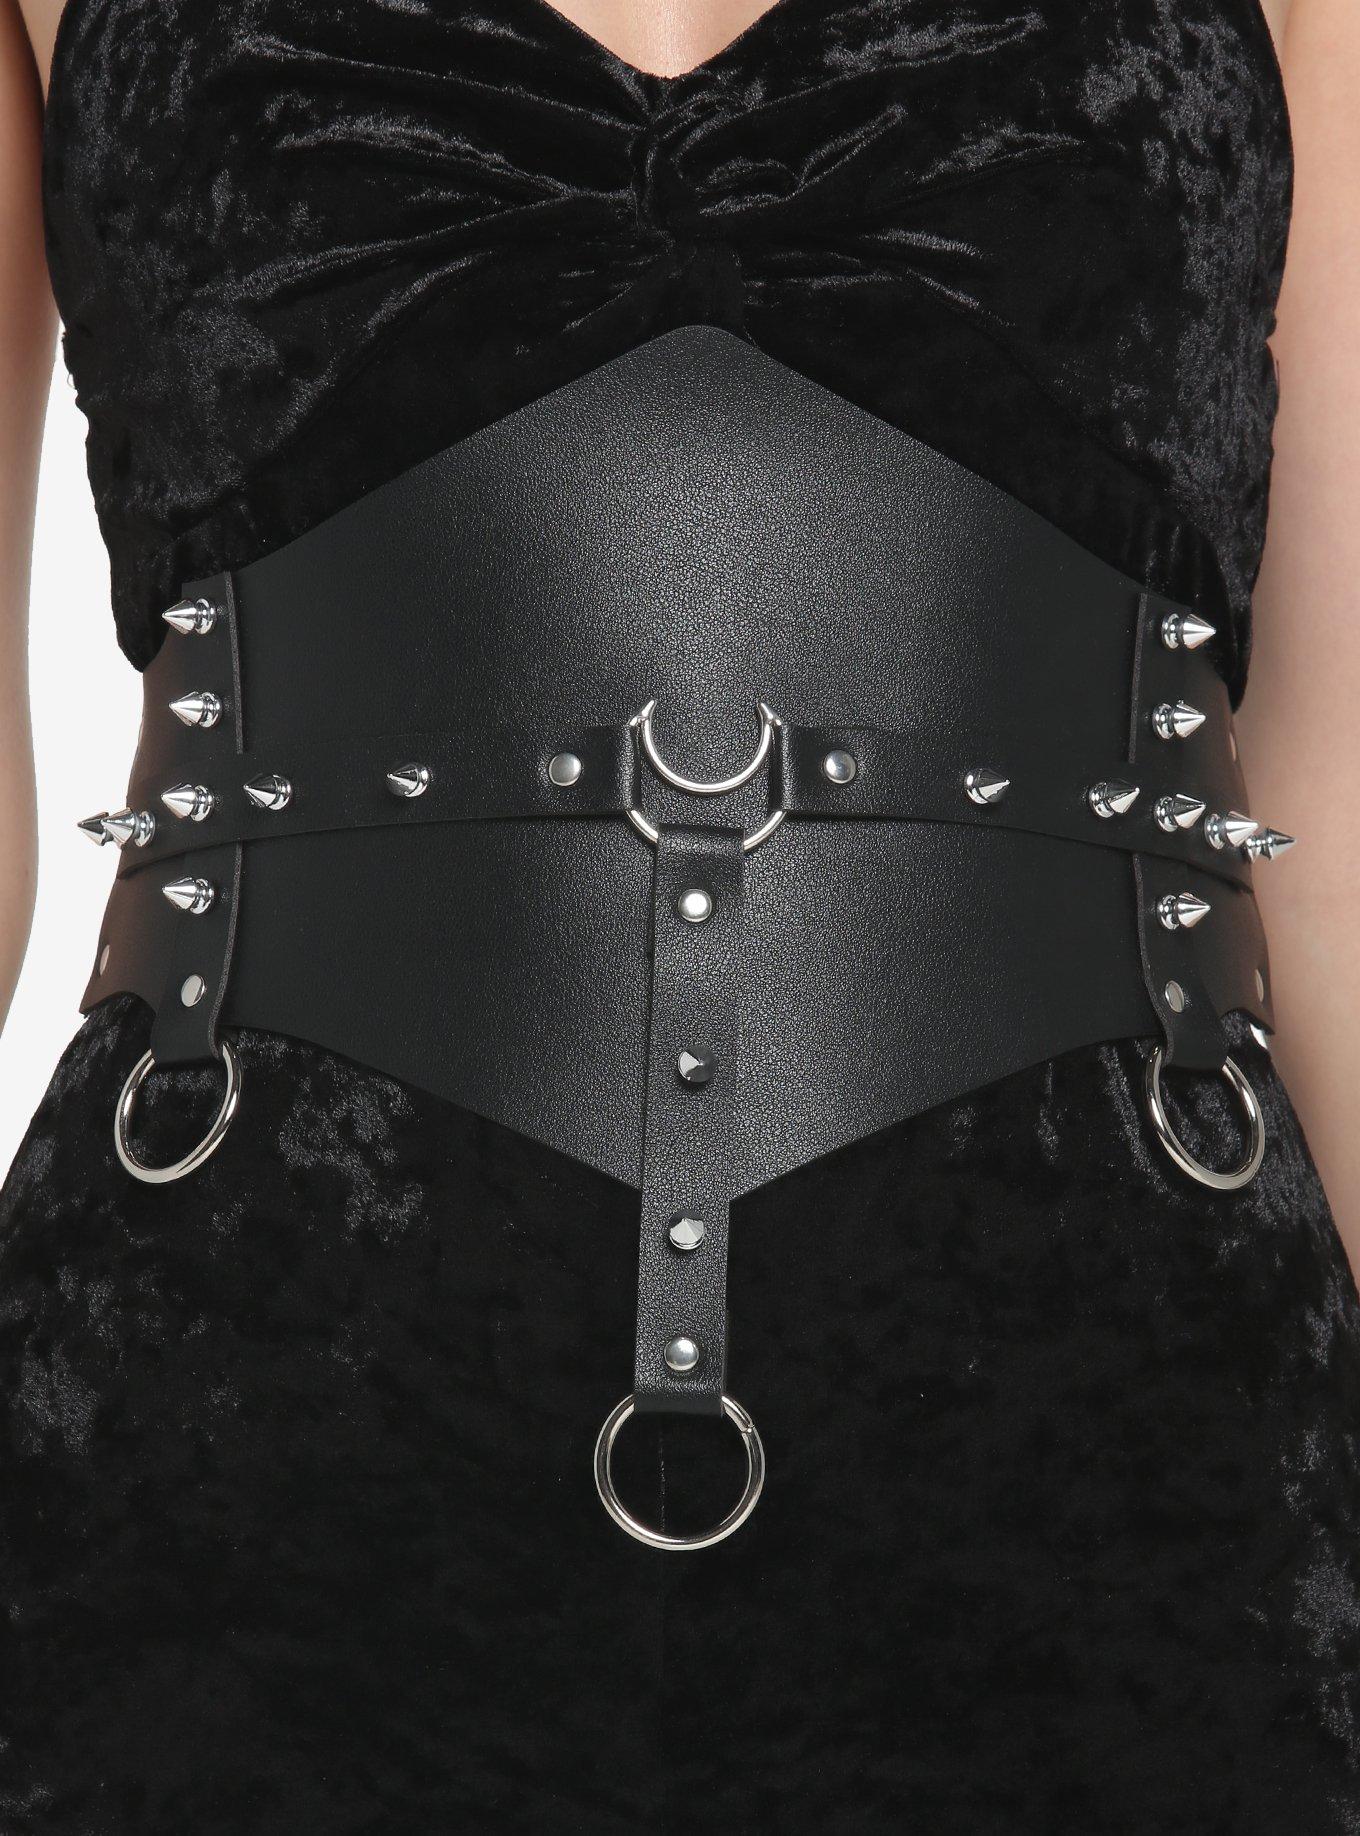 Black Spiked Moon Corset | Hot Topic